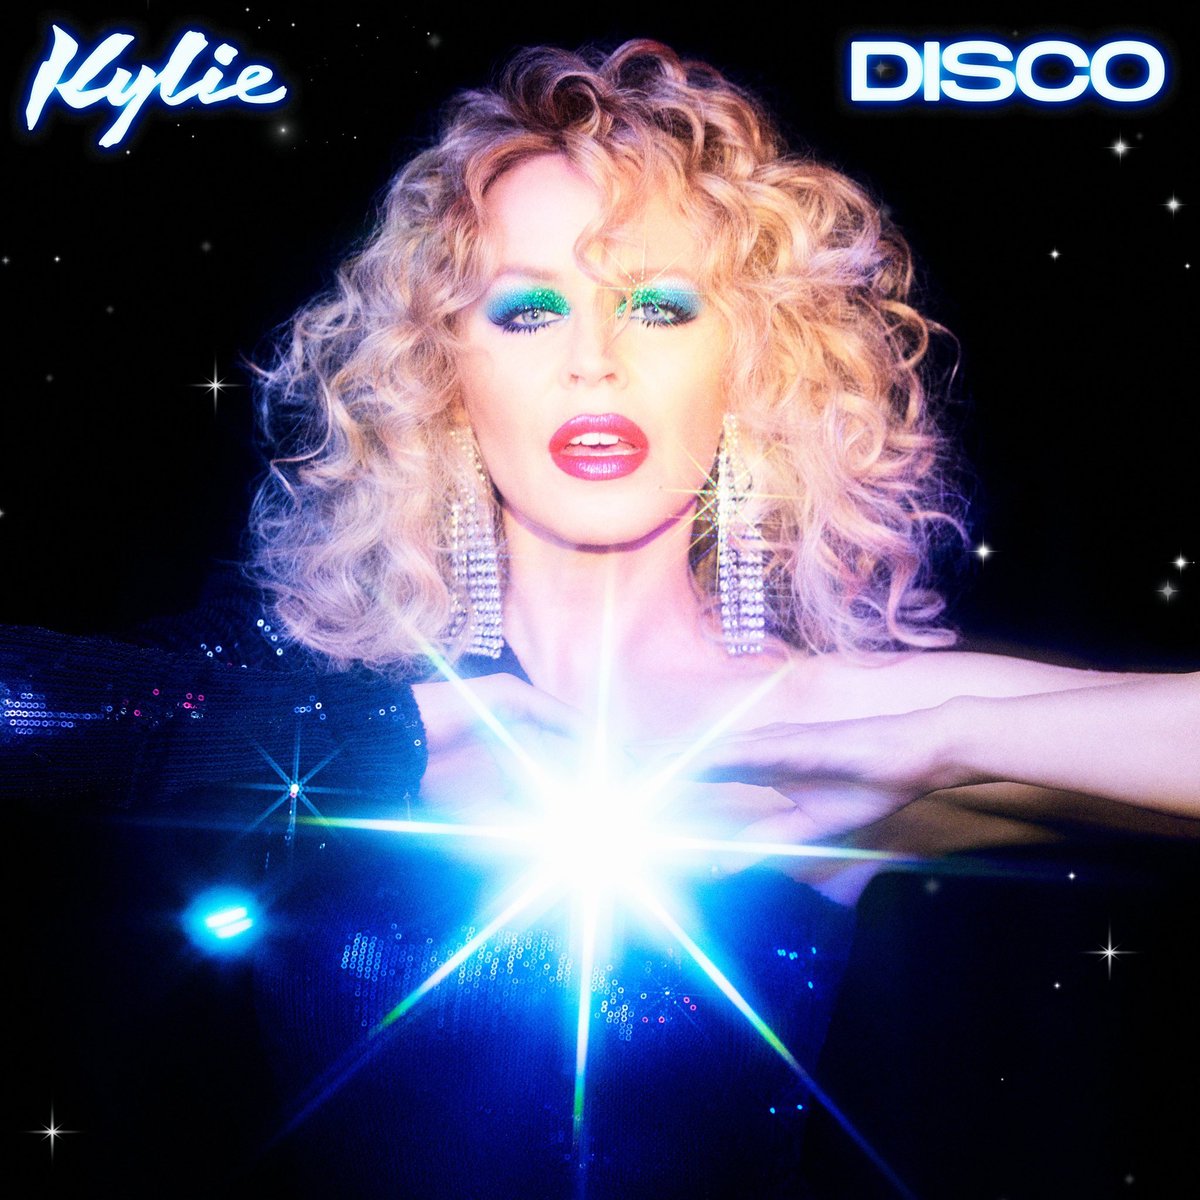 60. Kylie Minogue - Disco (divisive and maybe slightly hollow but still a delightful dancey pop record from the Queen)